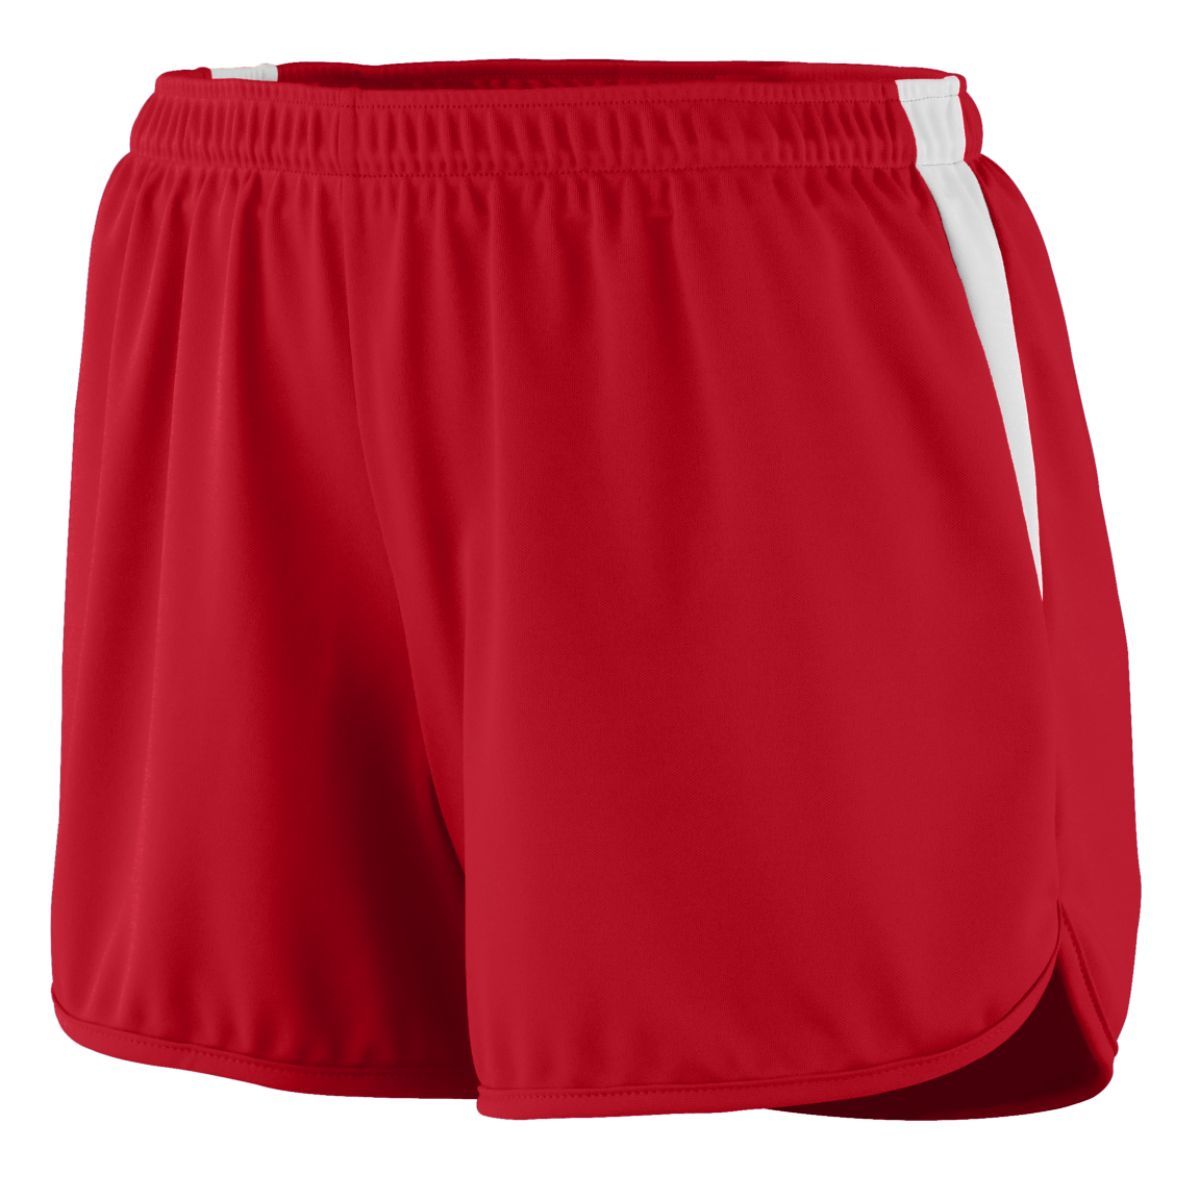 Augusta Sportswear Ladies Rapidpace Track Shorts in Red/White  -Part of the Ladies, Ladies-Shorts, Augusta-Products, Track-Field product lines at KanaleyCreations.com